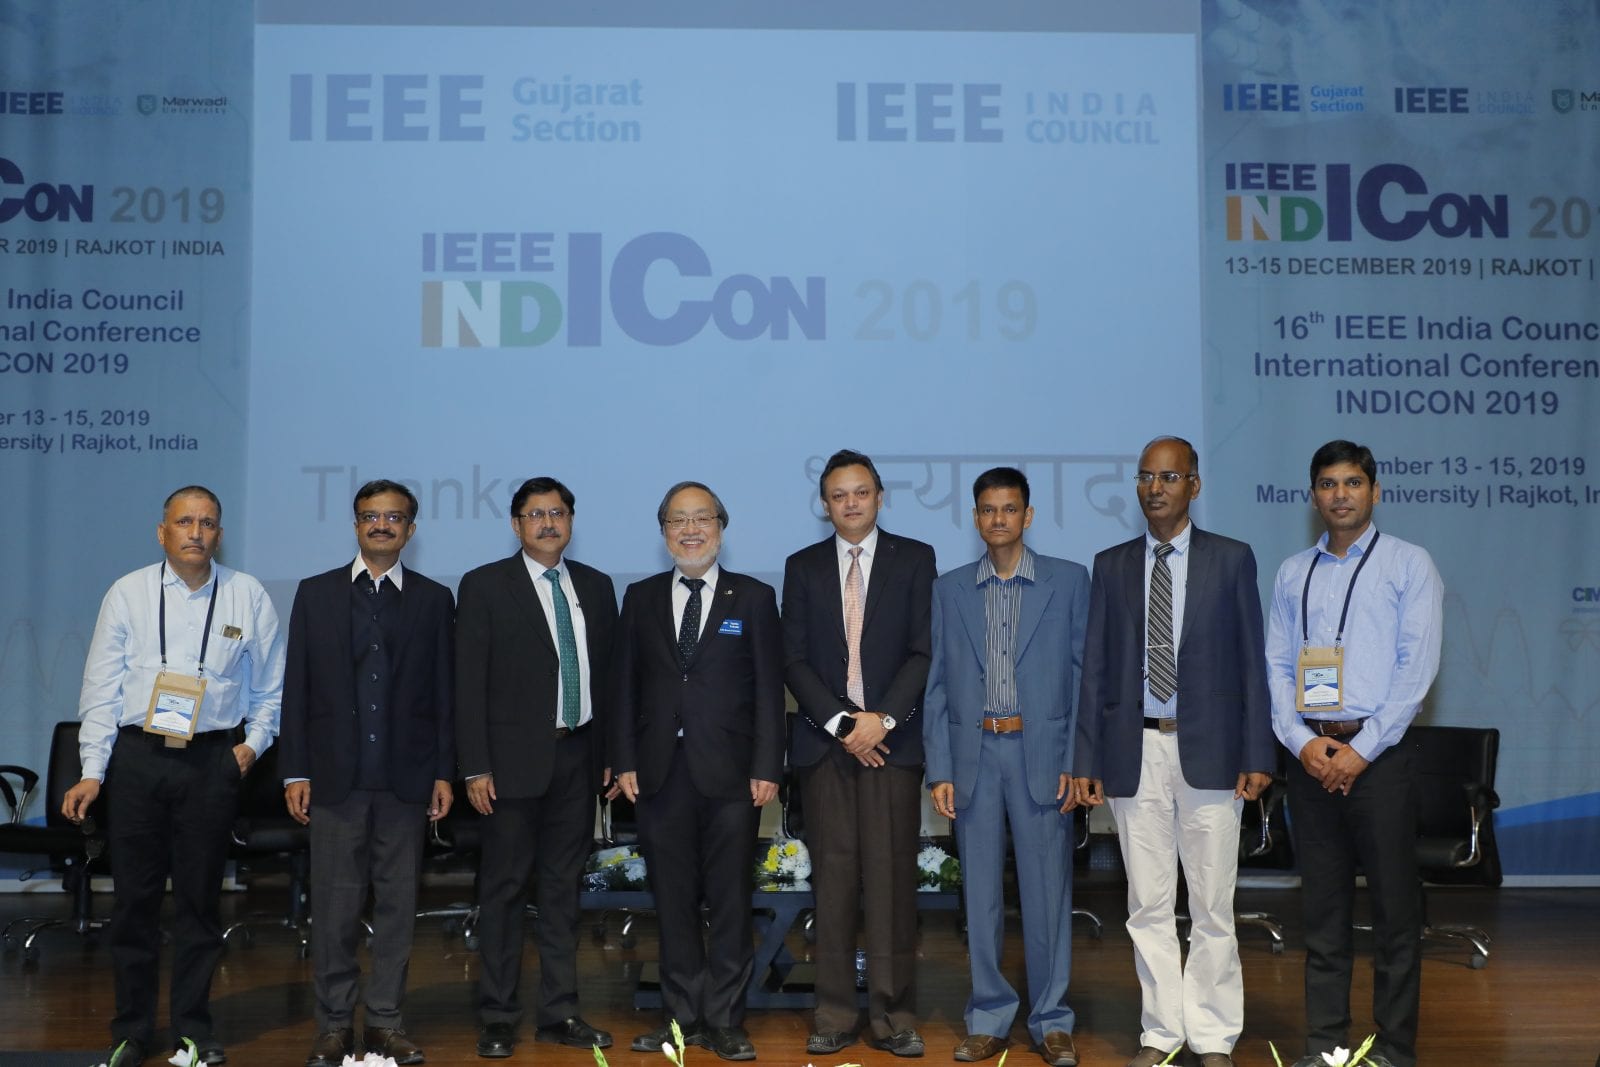 IEEE India Council International Conference (INDICON 2019) (1315